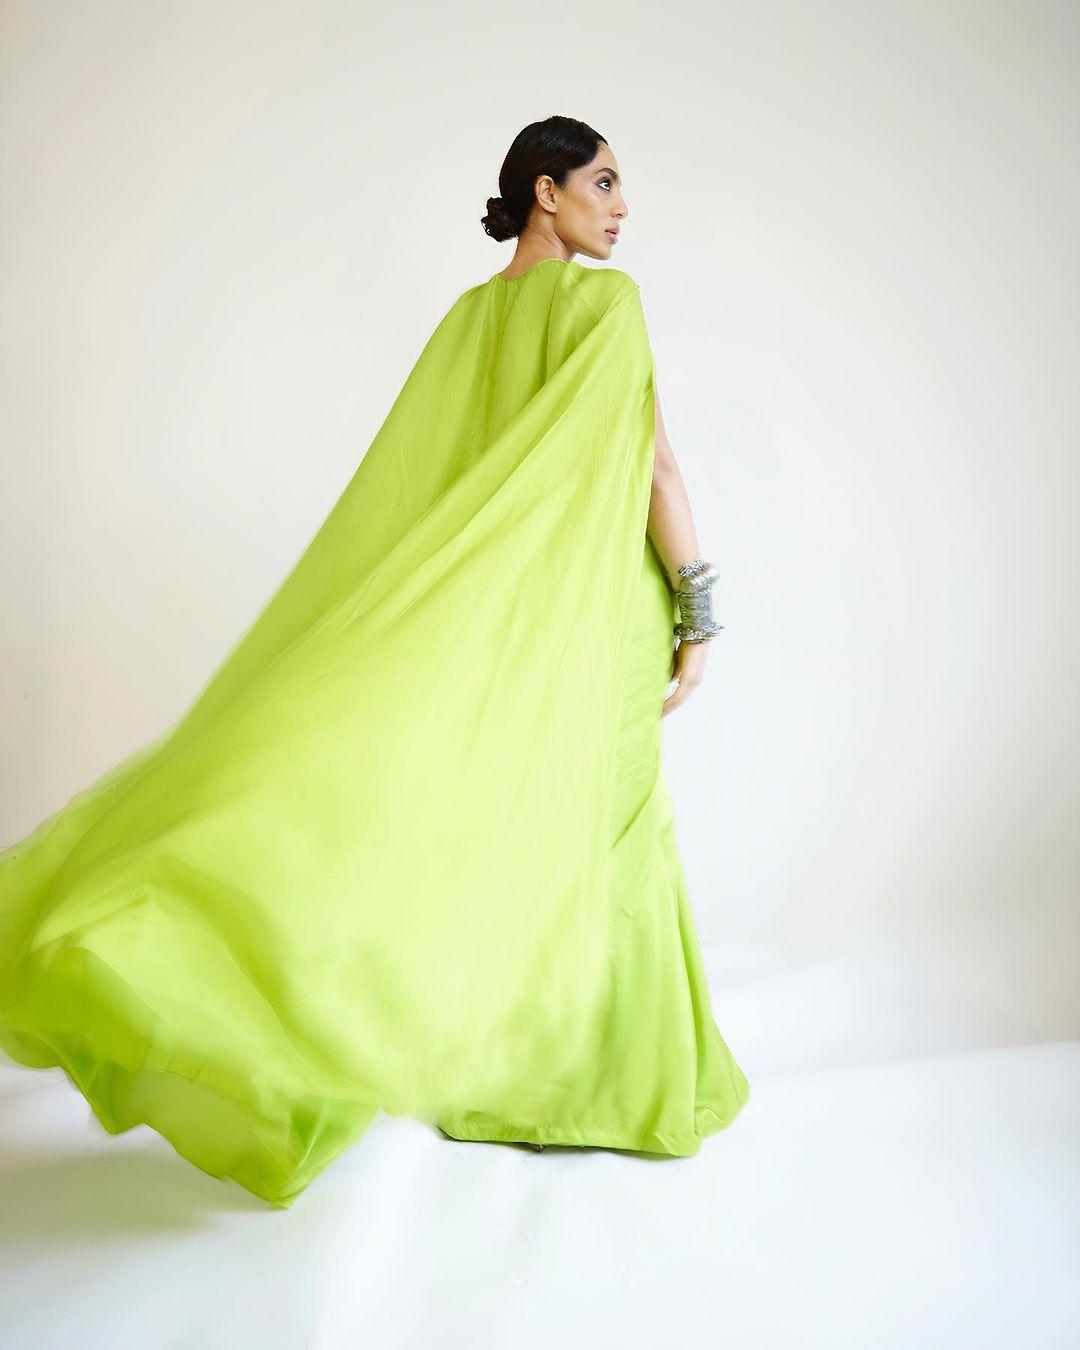 The green cape added a touch of contemporary flair to her traditional attire.